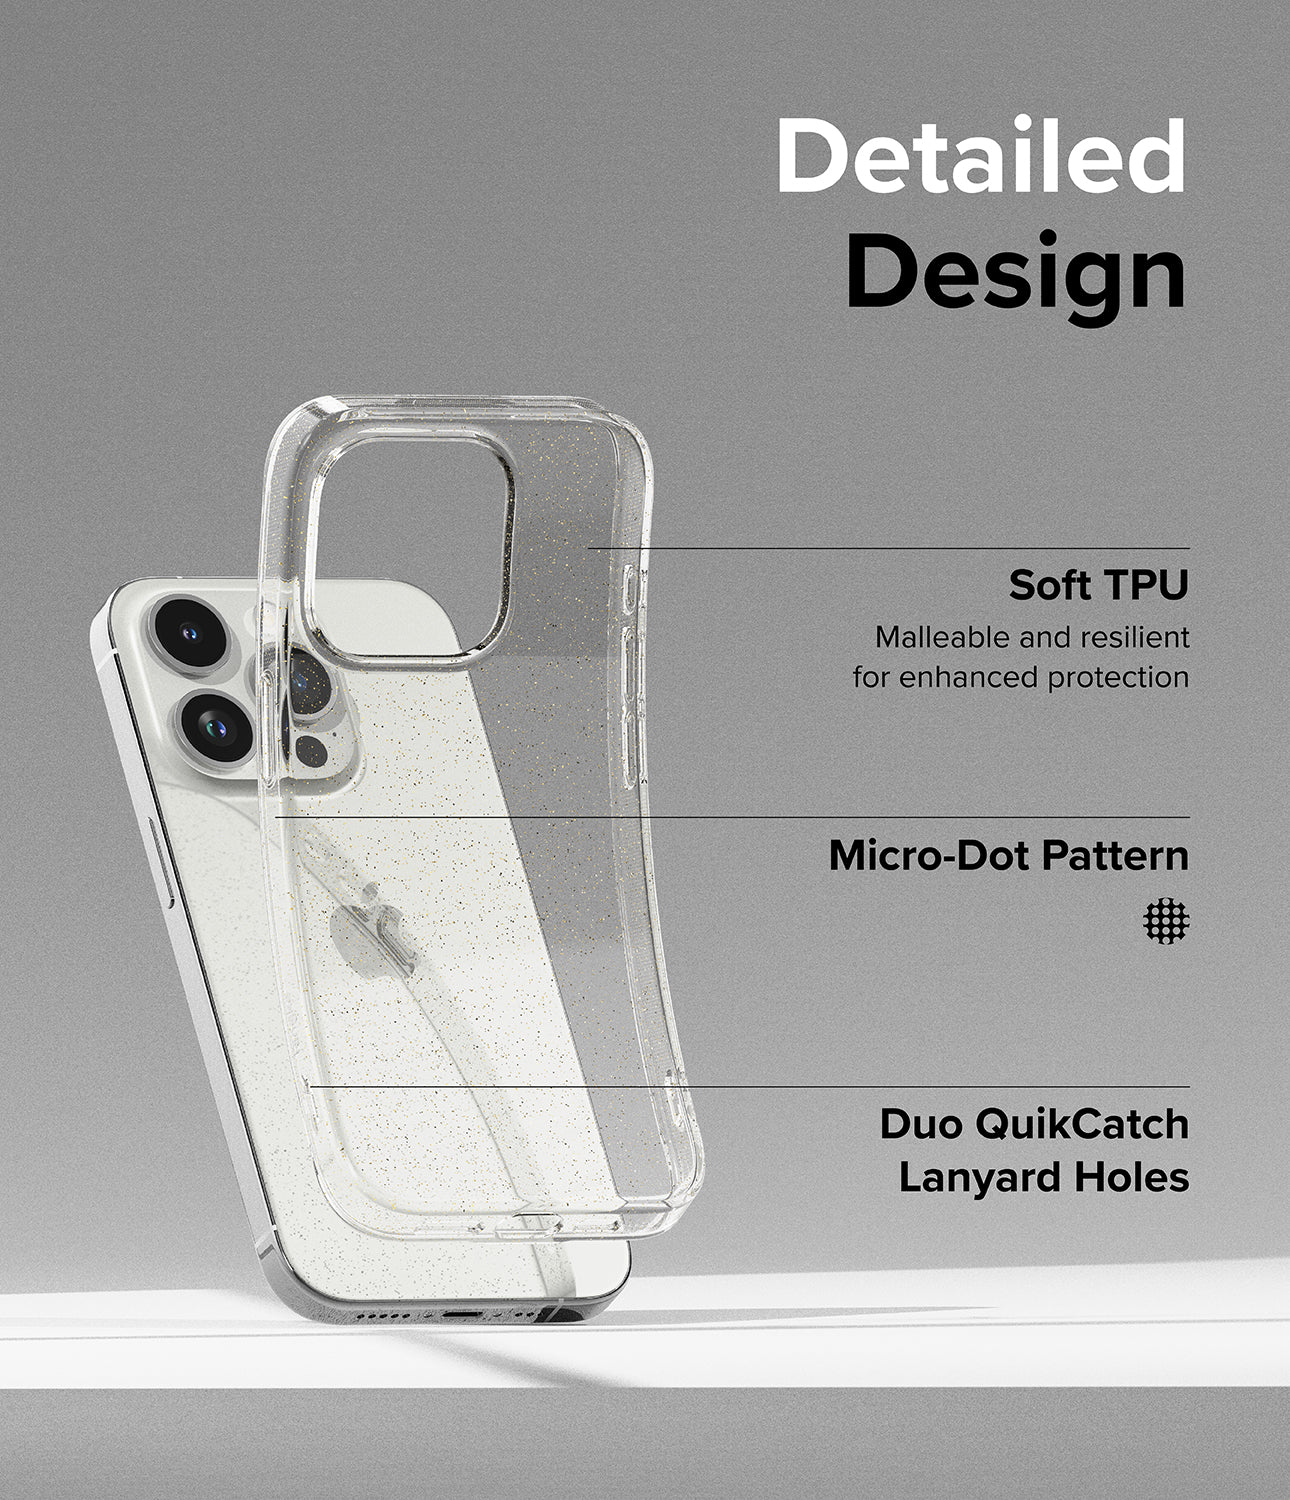 iPhone 15 Pro Max Case | Air Glitter Clear - Detailed Design. Malleable and resilient for enhanced protection with Soft TPU. Micro-Dot Pattern. Duo QuikCatch Lanyard Holes